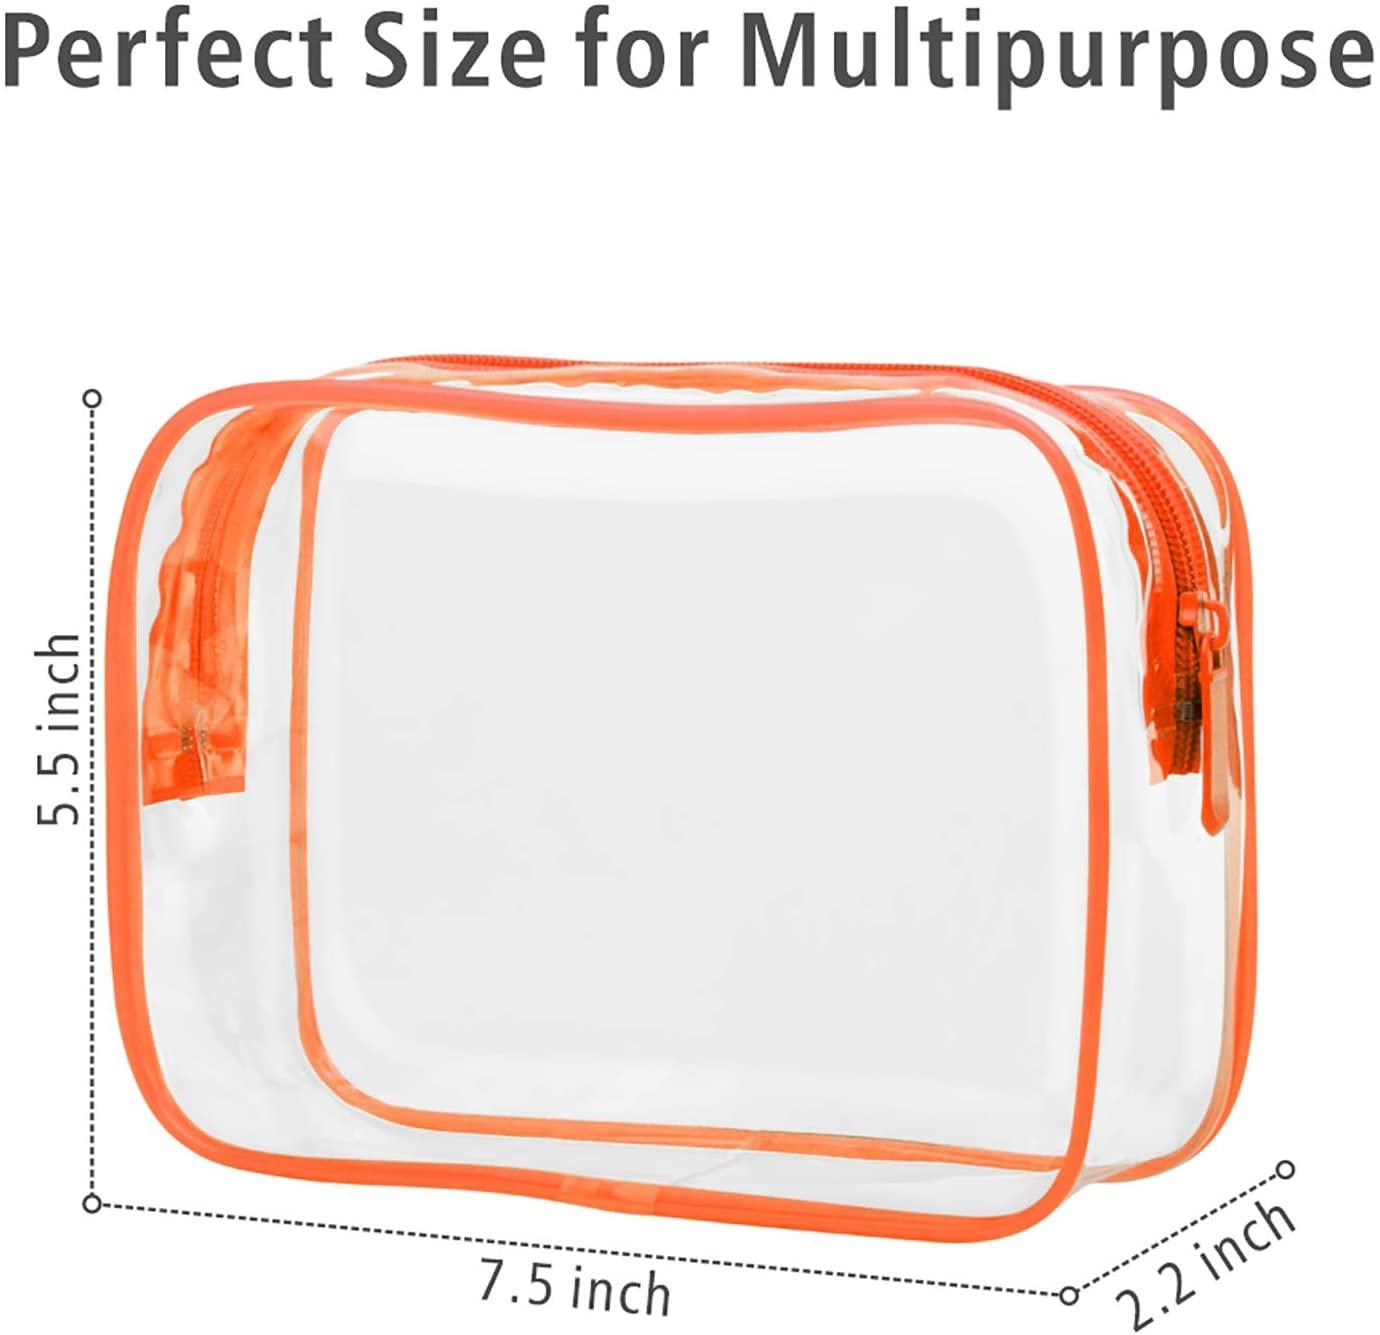 TSA Approved Toiletry Bag, Clear Makeup Bag Waterproof Quart Size Bag, Travel Makeup Cosmetic Bag for Women - Decotree.co Online Shop